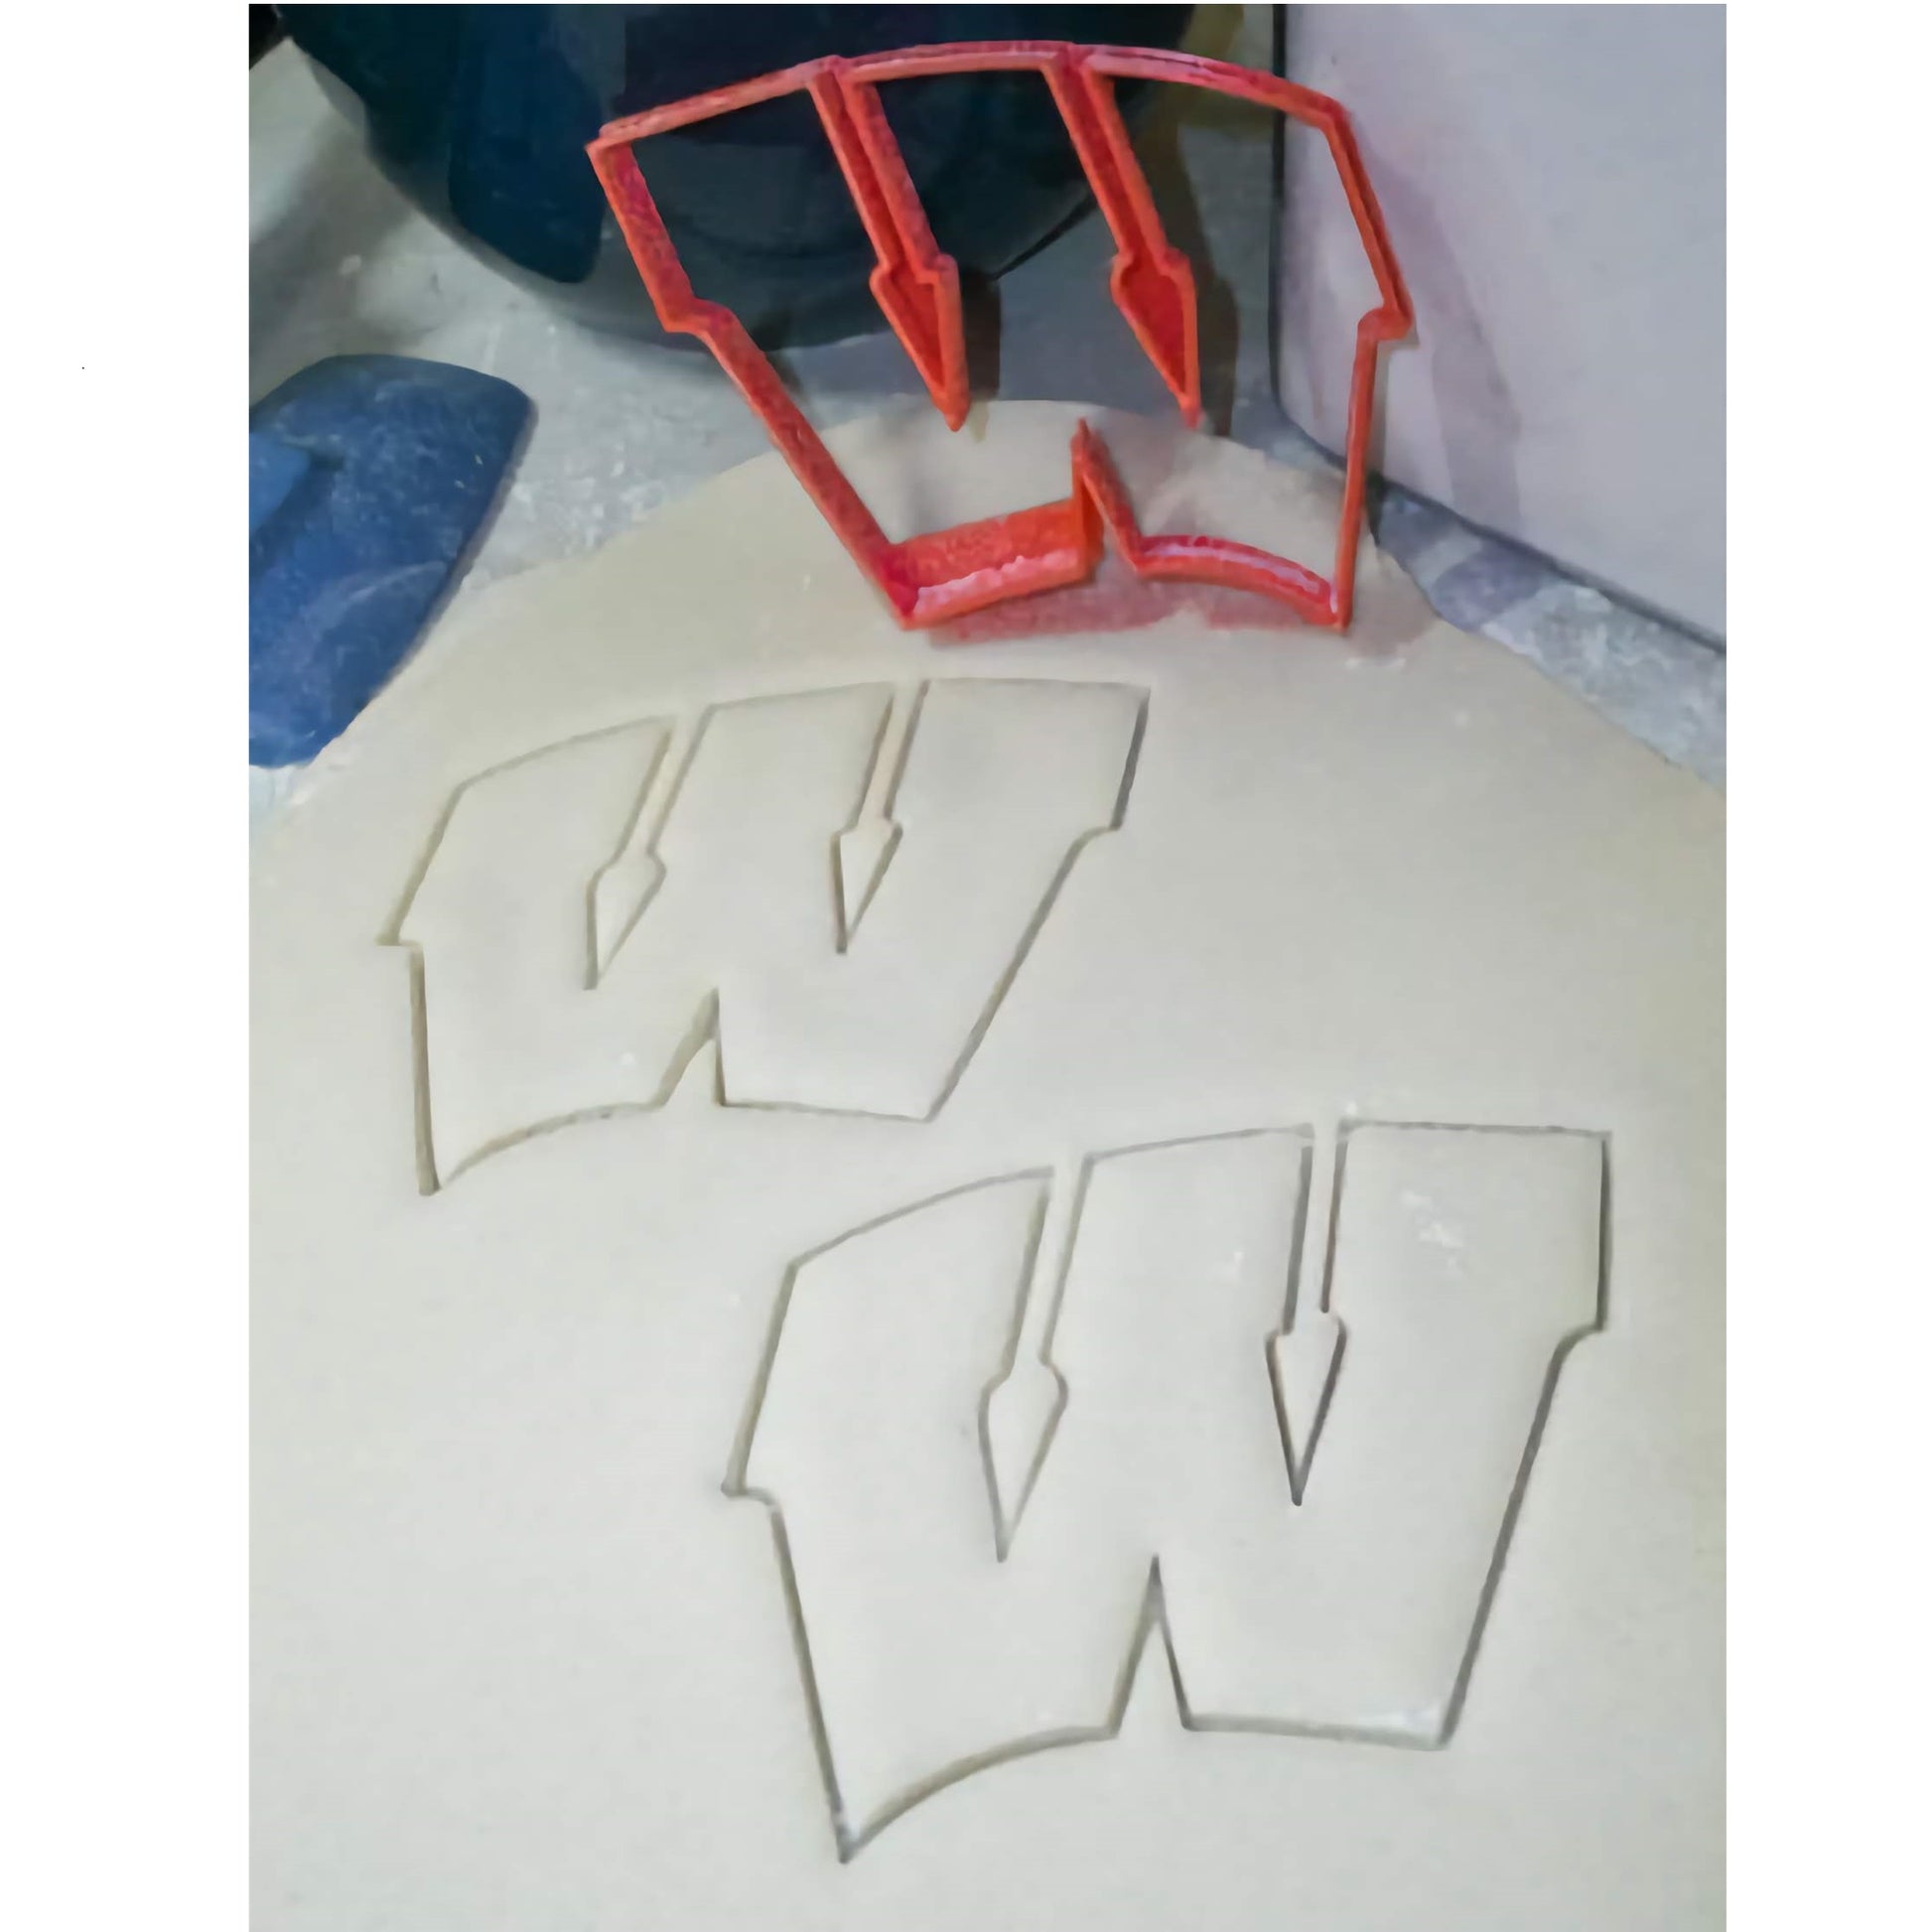 Custom-designed Wisconsin Badgers logo cookie cutter, with red sturdy handle and sharp cutting edges for precise shapes, perfect for sports-themed parties and tailgating. This unique baking accessory is available at Lynn's Cake, Candy, and Chocolate Supplies.